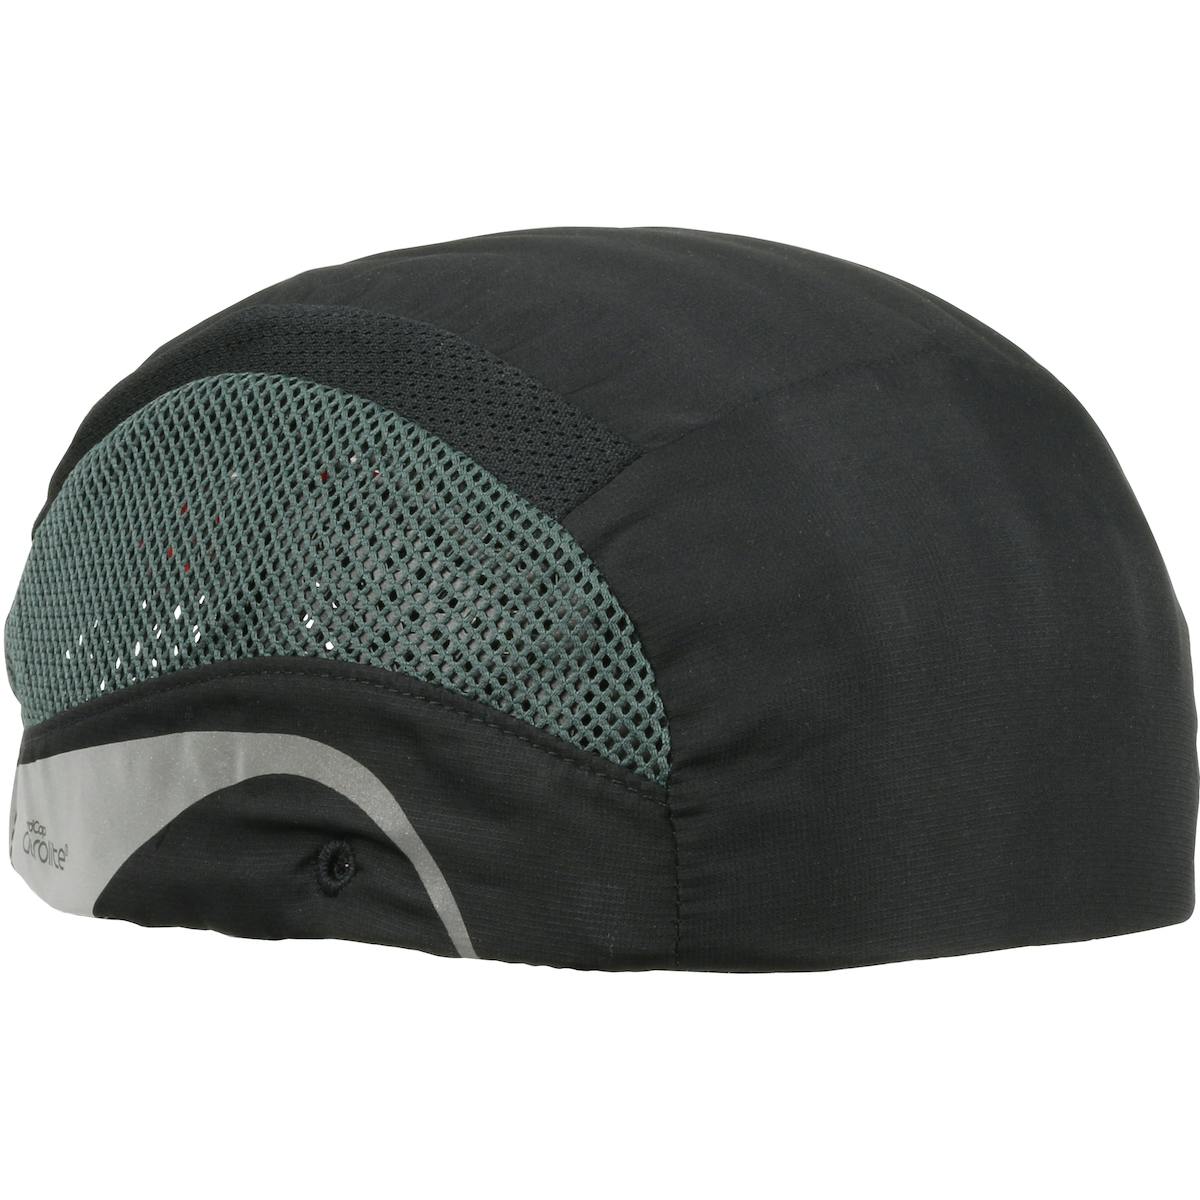 HardCap Aerolite™ Lightweight Baseball Style Bump Cap with HDPE Protective Liner and Adjustable Back - Brimless (282-AEN000)_0